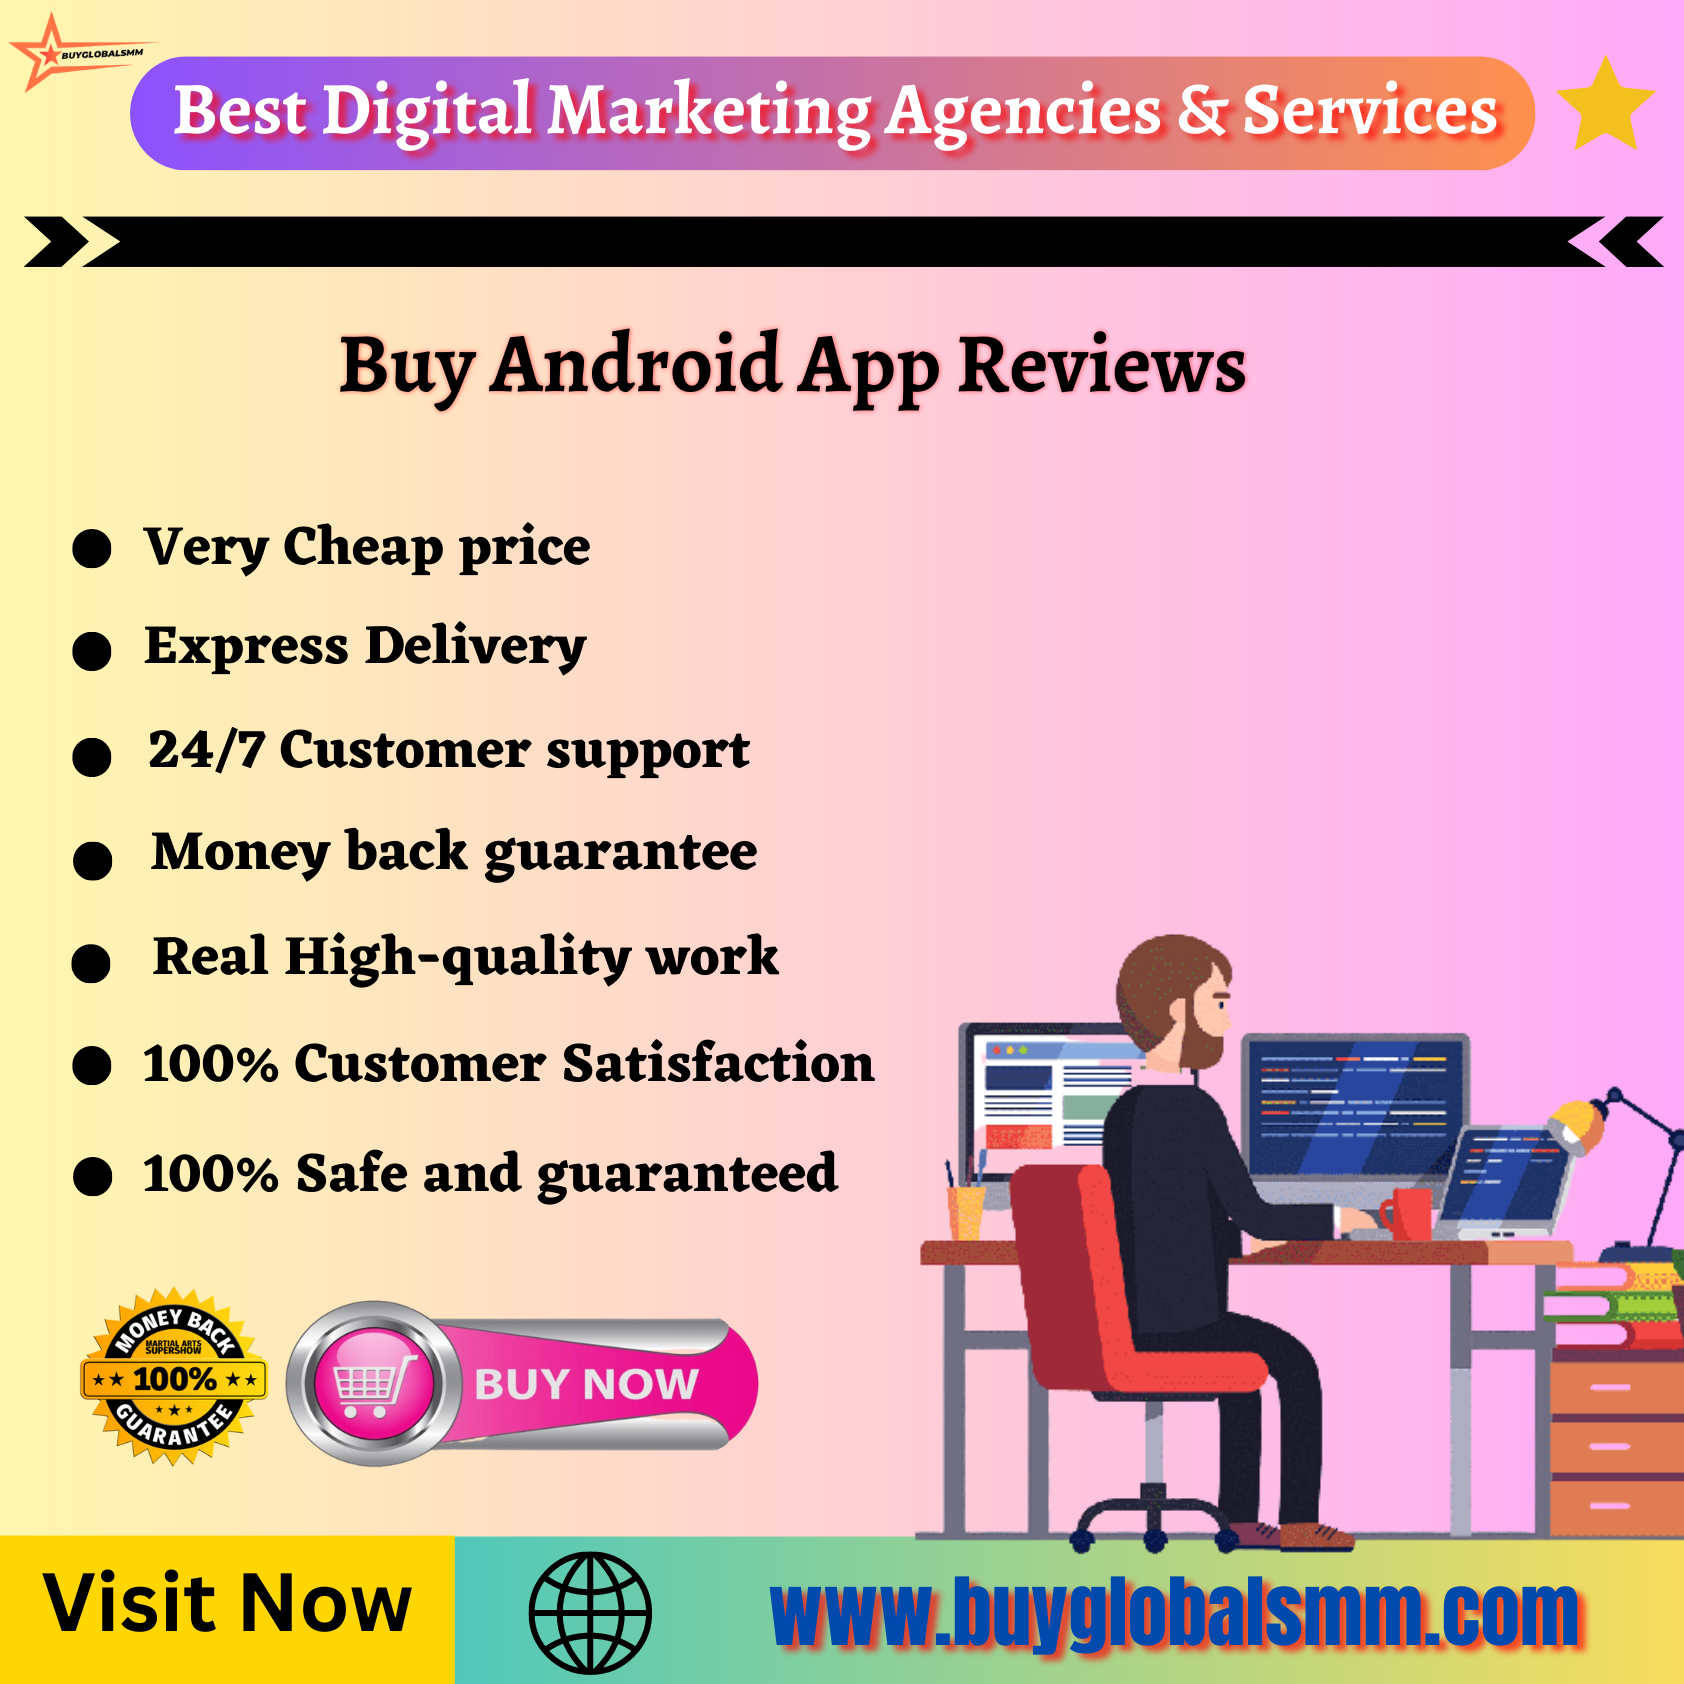 Buy Android App Reviews-100% best, and permanent reviews...